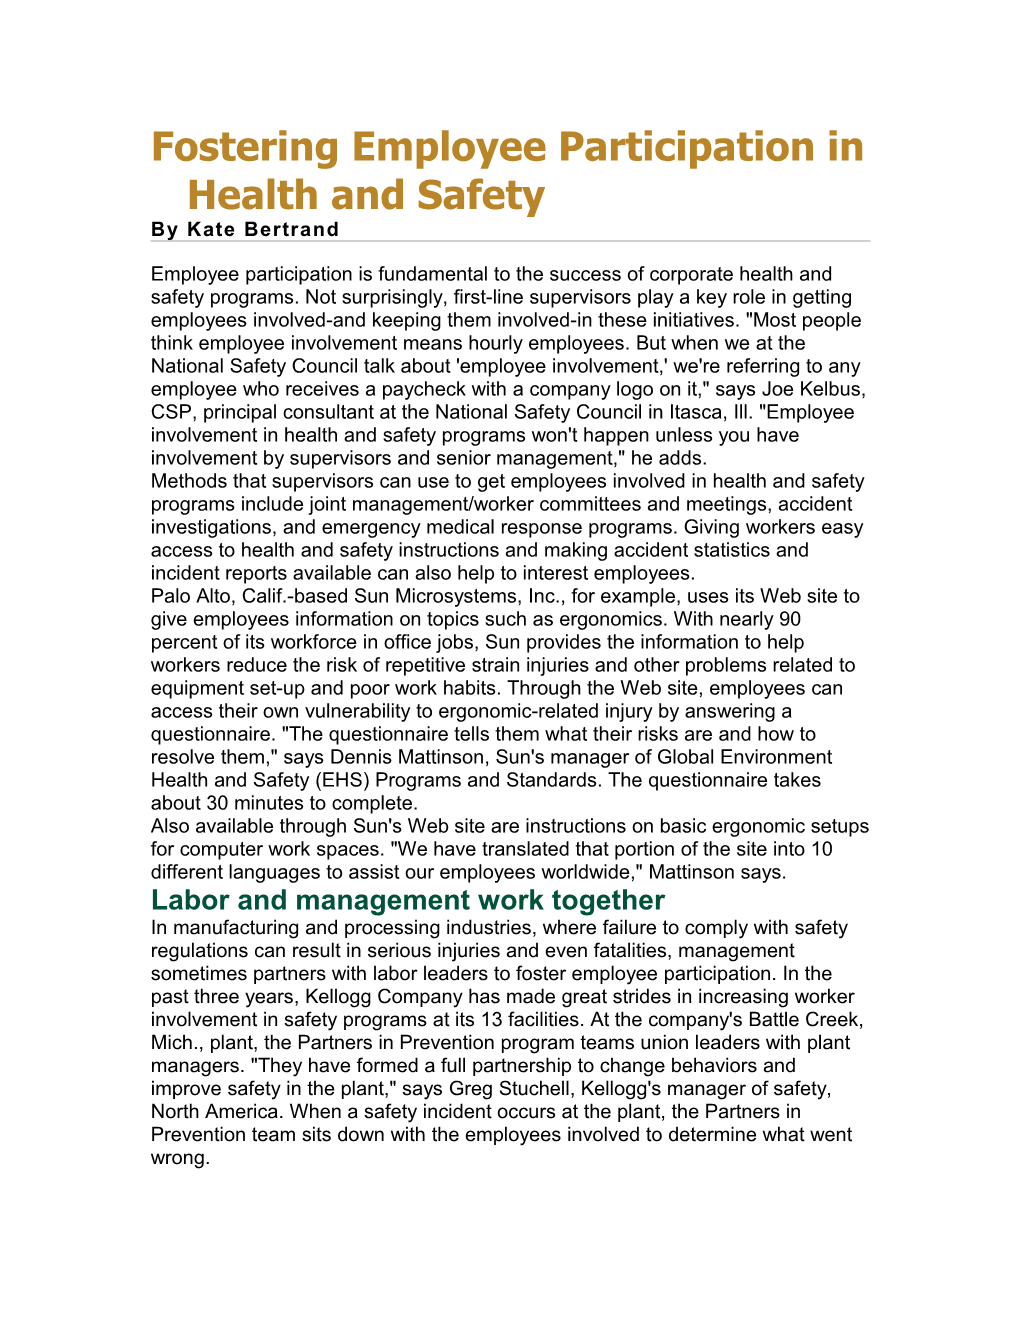 Fostering Employee Participation in Health and Safety